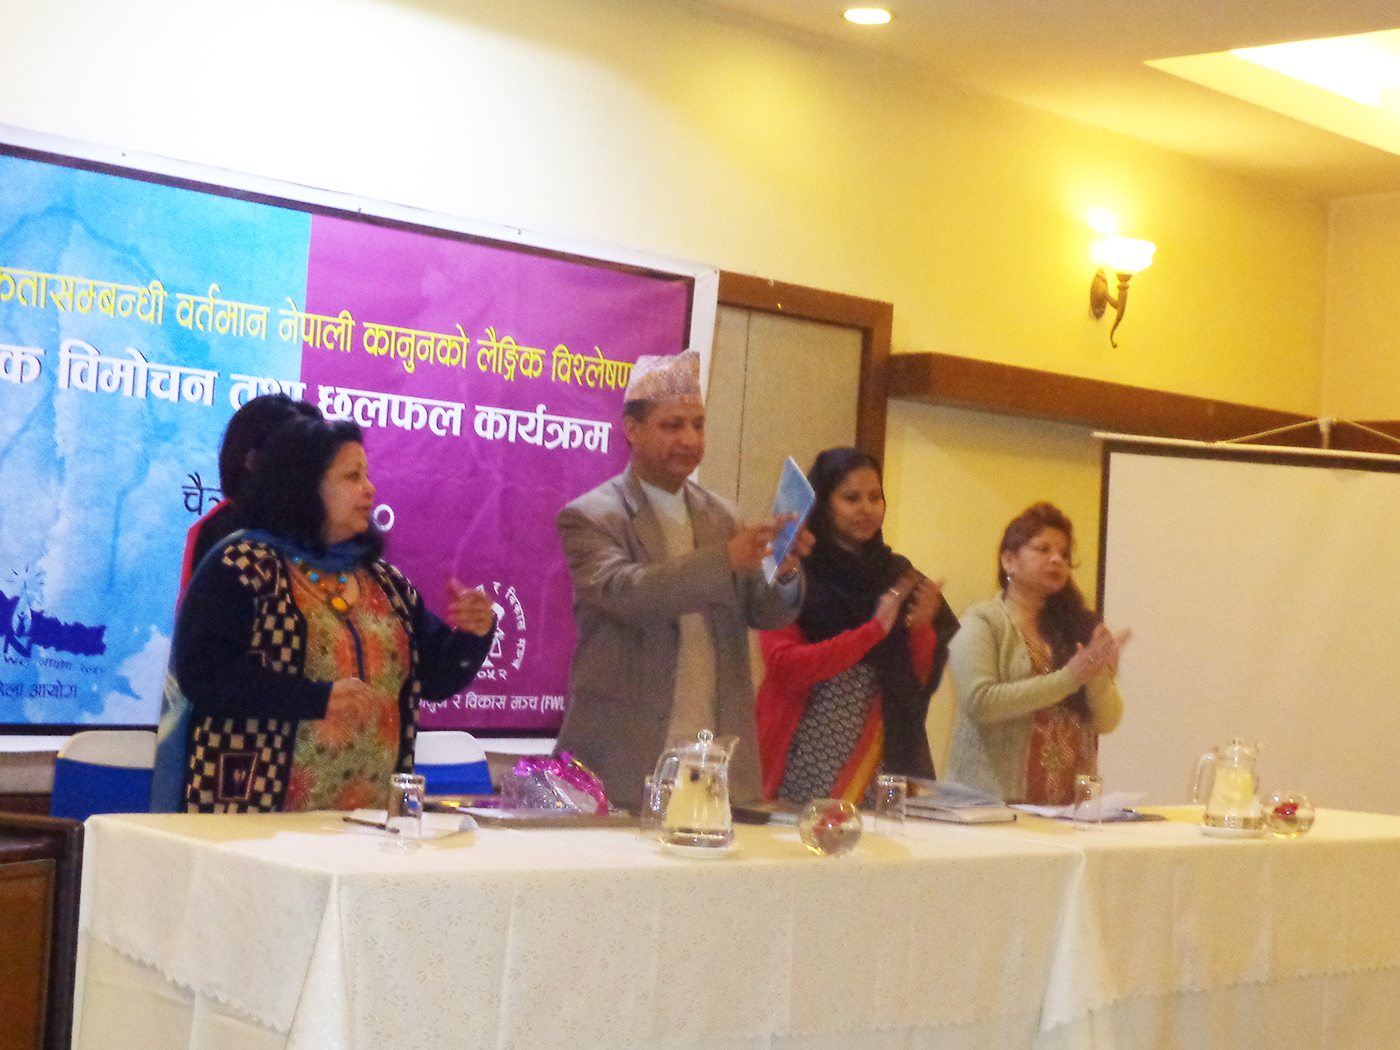 Book Launch of the Gender Analysis of Citizenship Law by the Secretary of Ministry of Home Affairs in March 2014